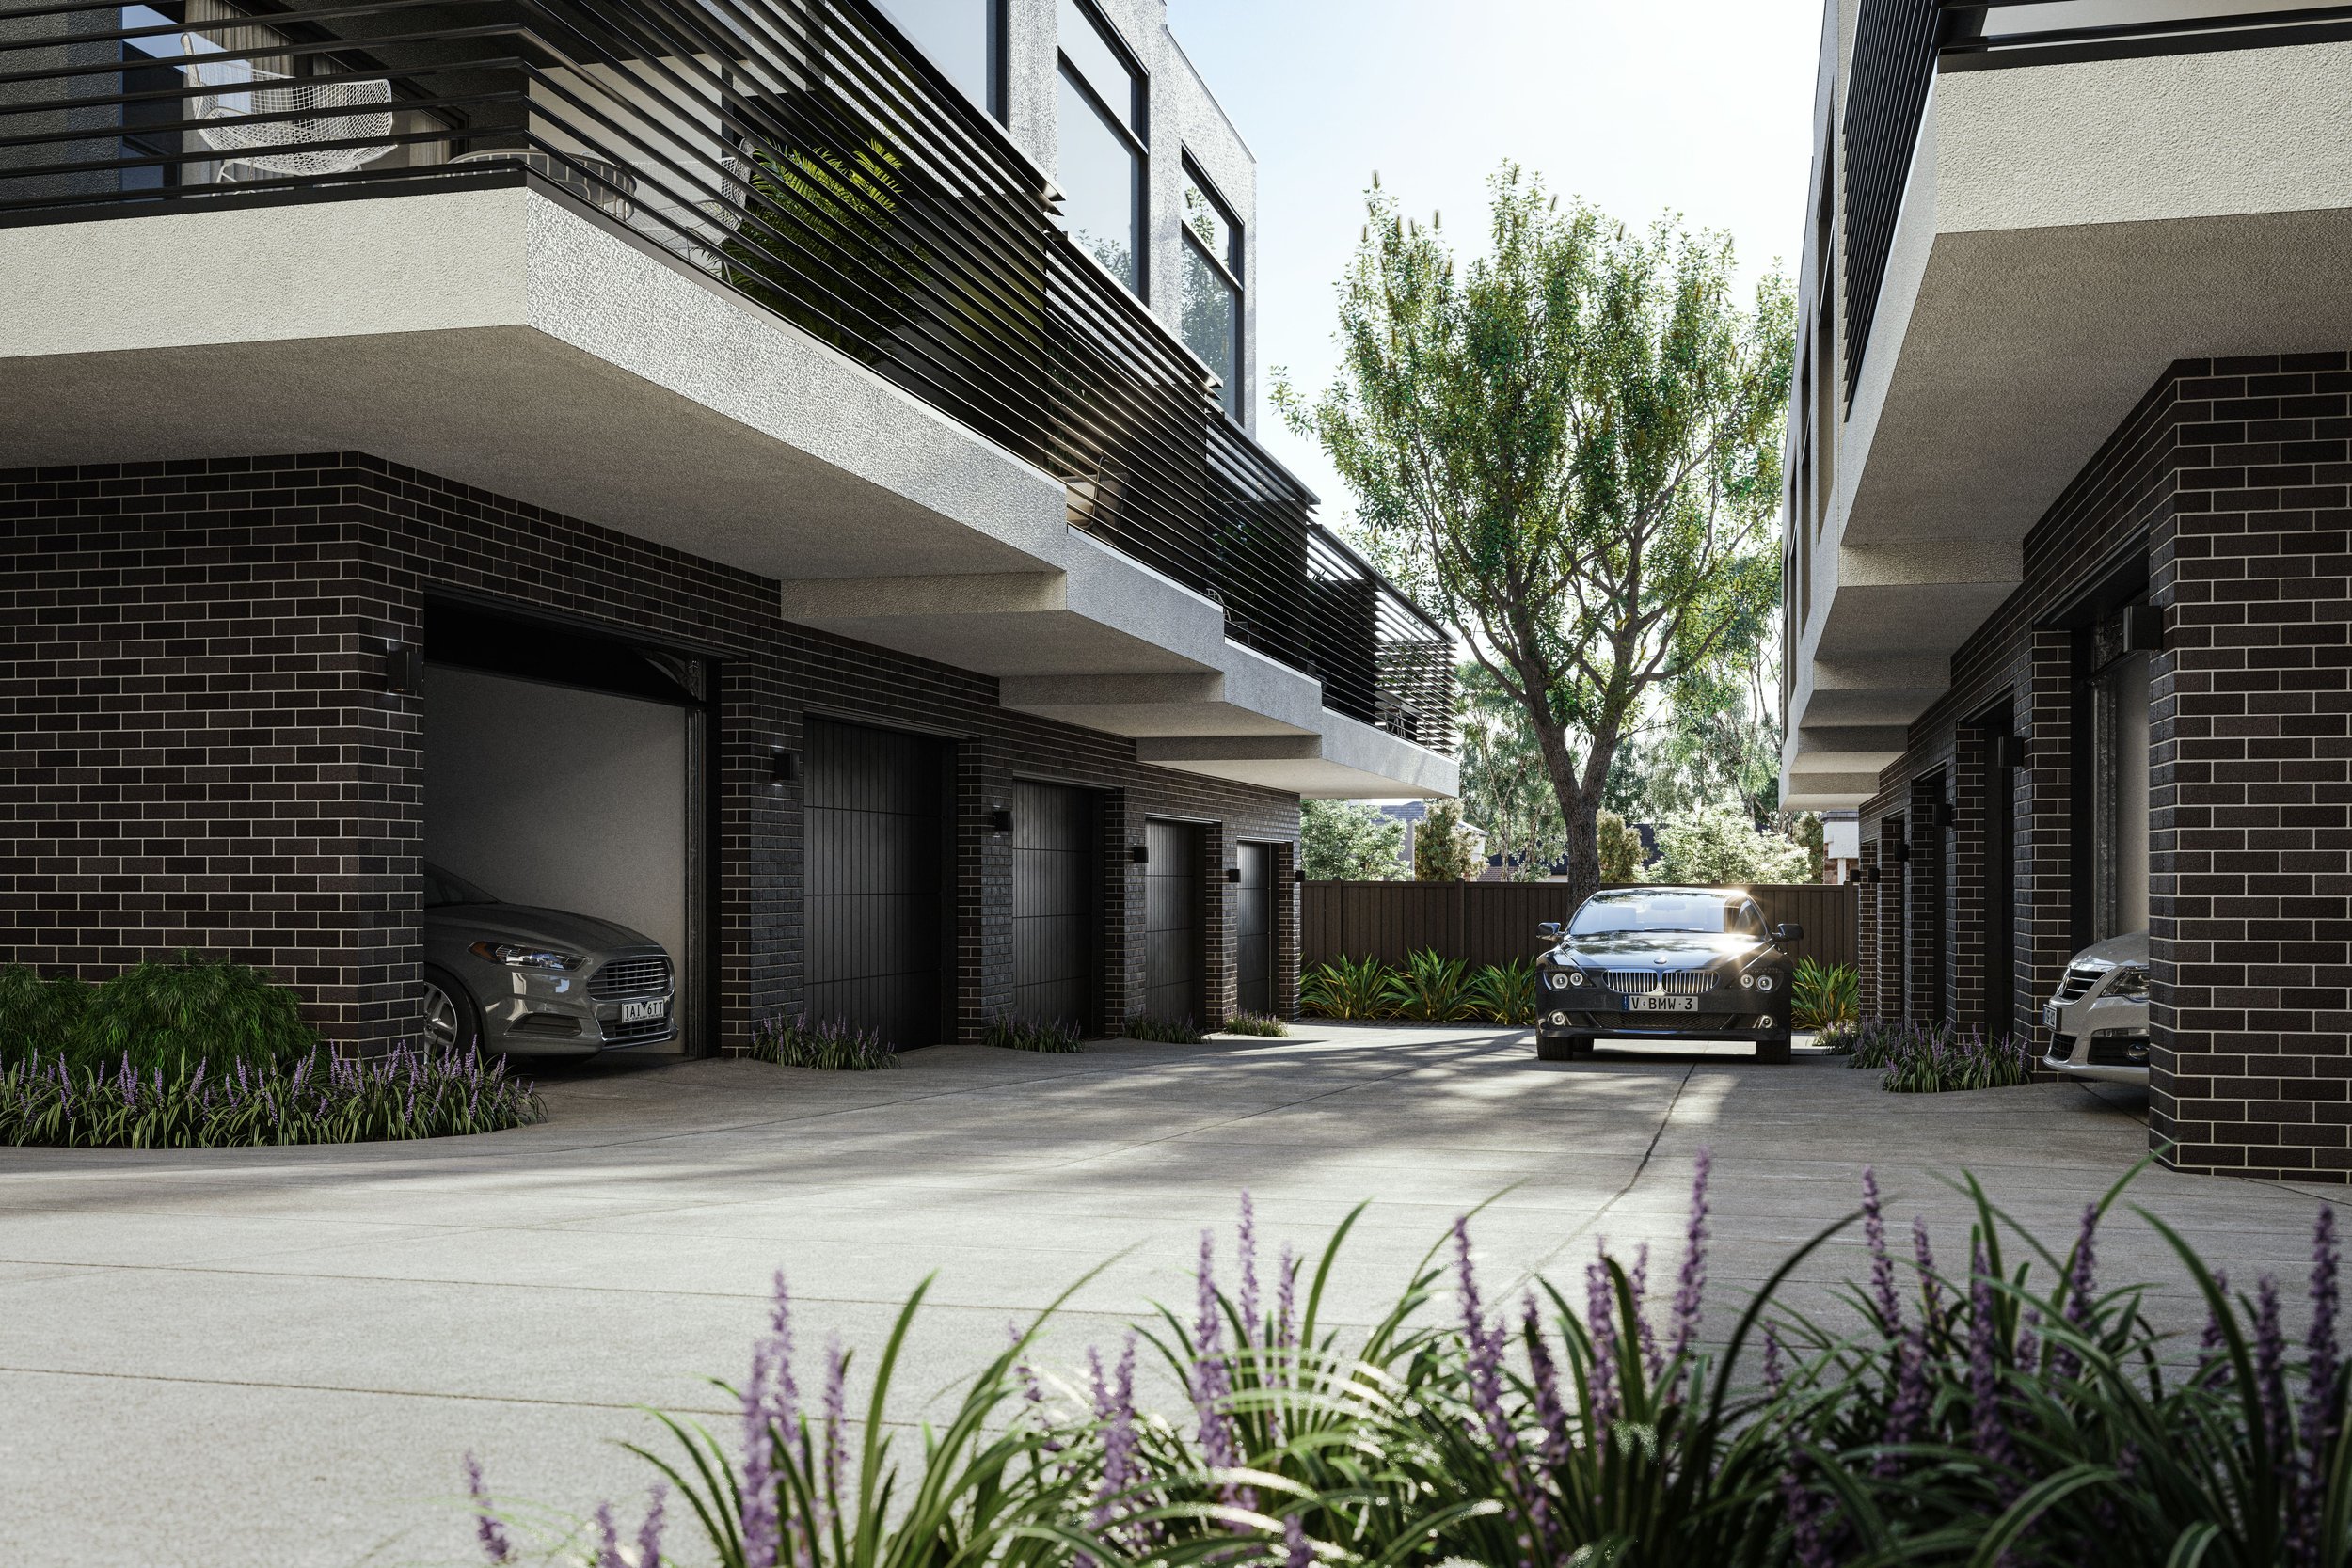 Rowville -  The Stud Park Residences - 1102-1104 Stud Road, Rowville, VIC 3178 - Townly - 4.jpg